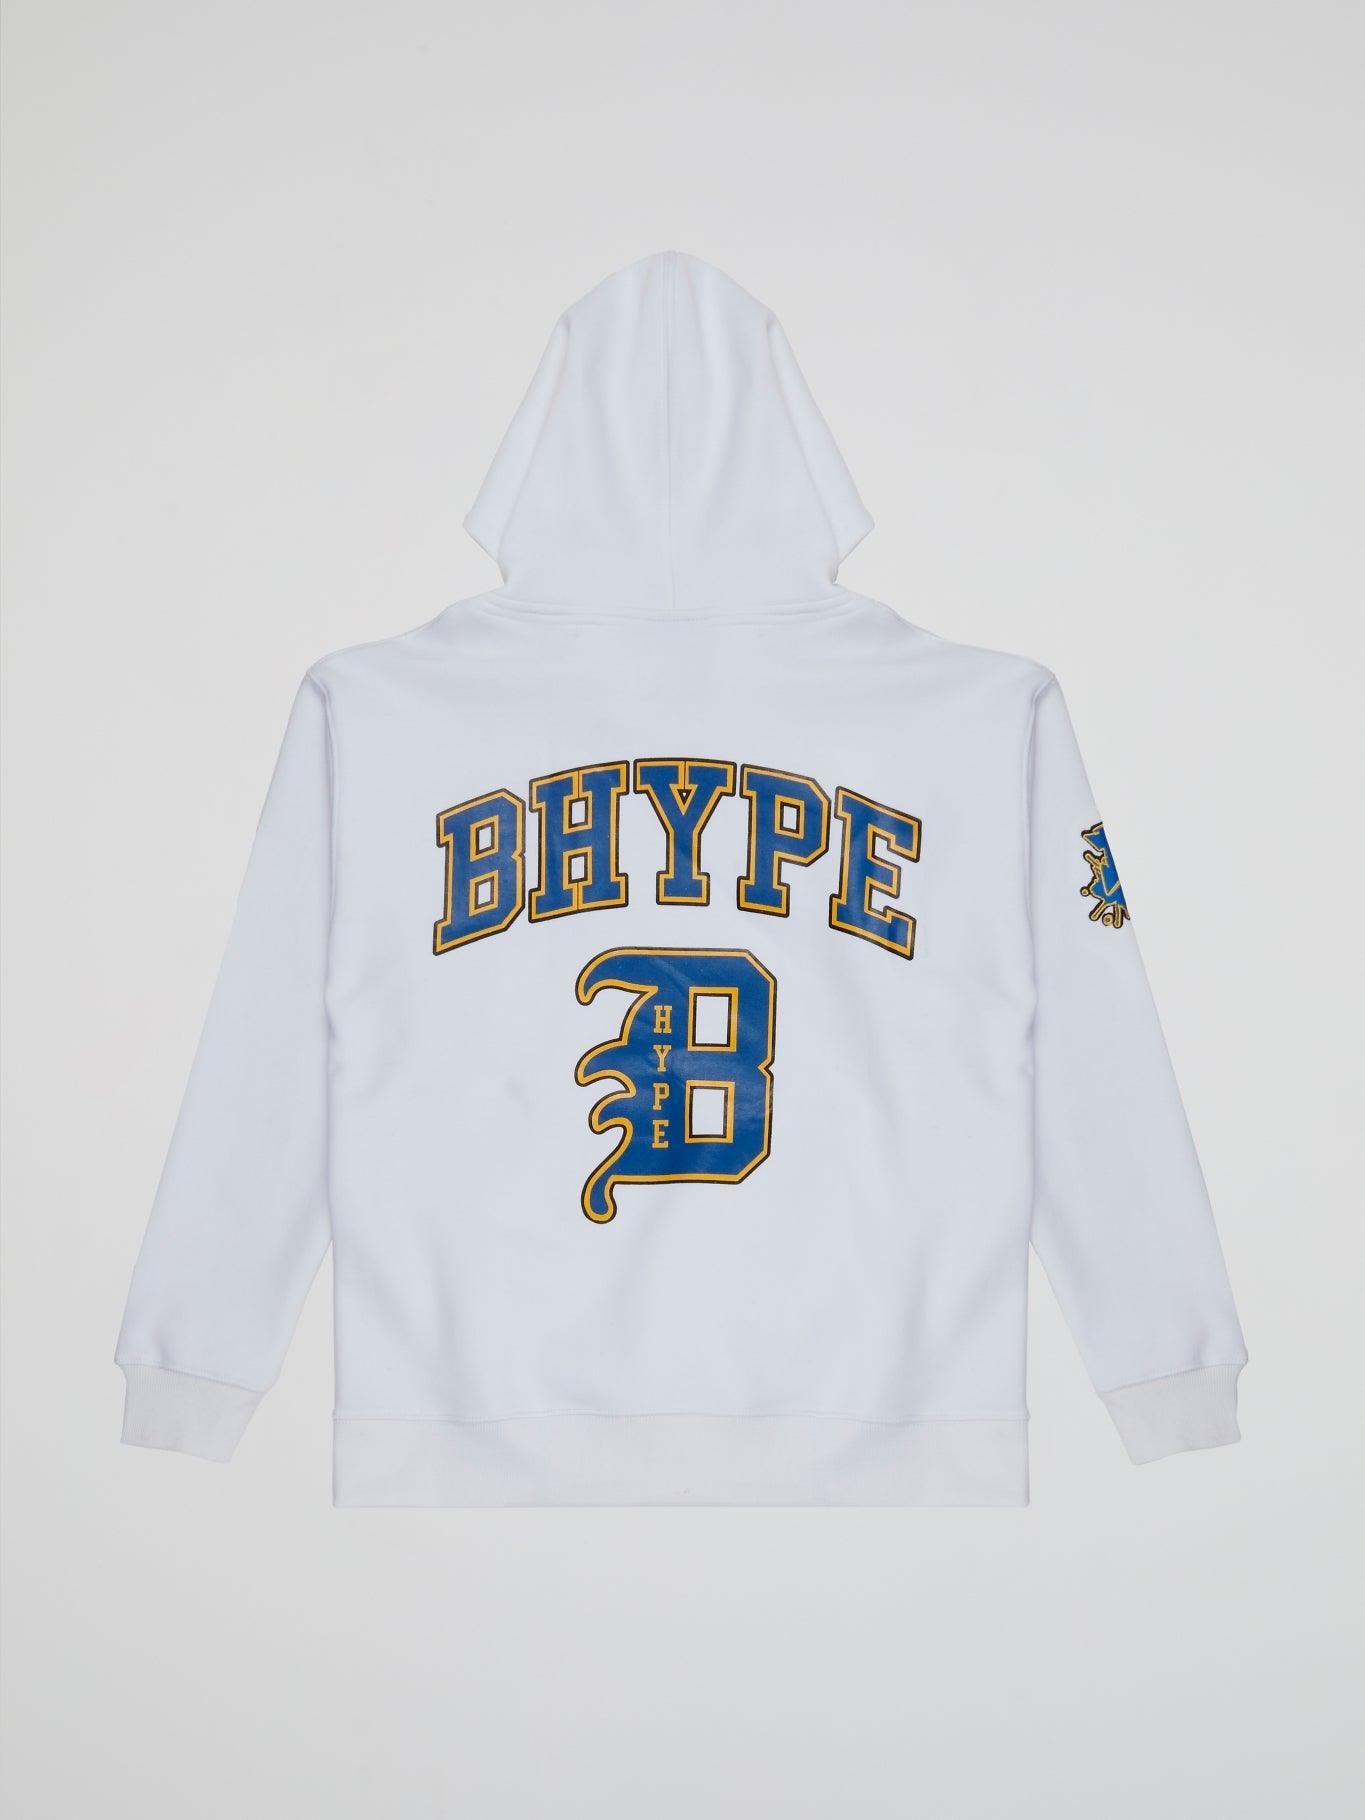 BHYPE WHITE HOODIE VARSITY COLLECTION - B-Hype Society